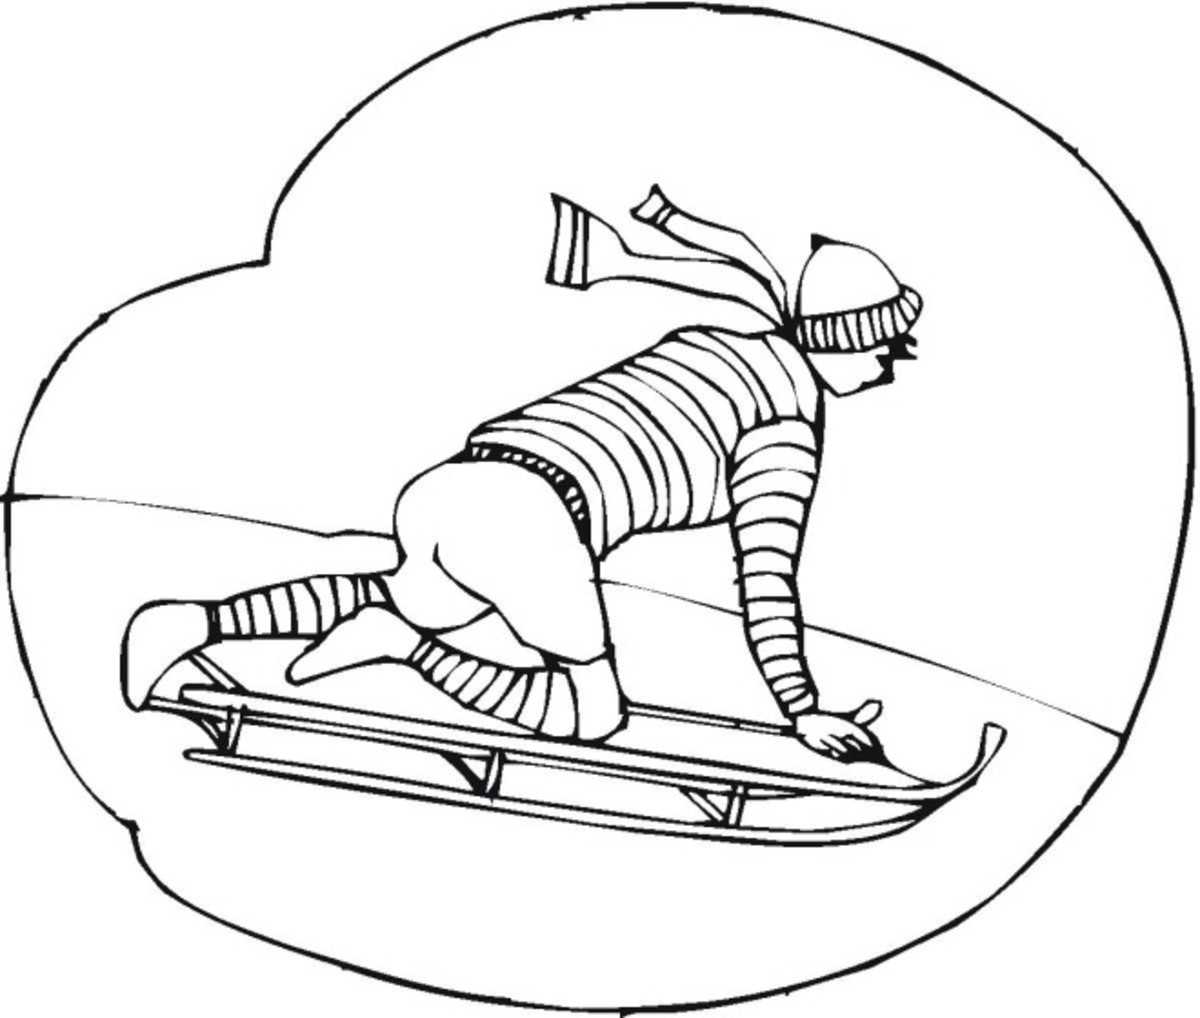 Boy sliding on sled with runners